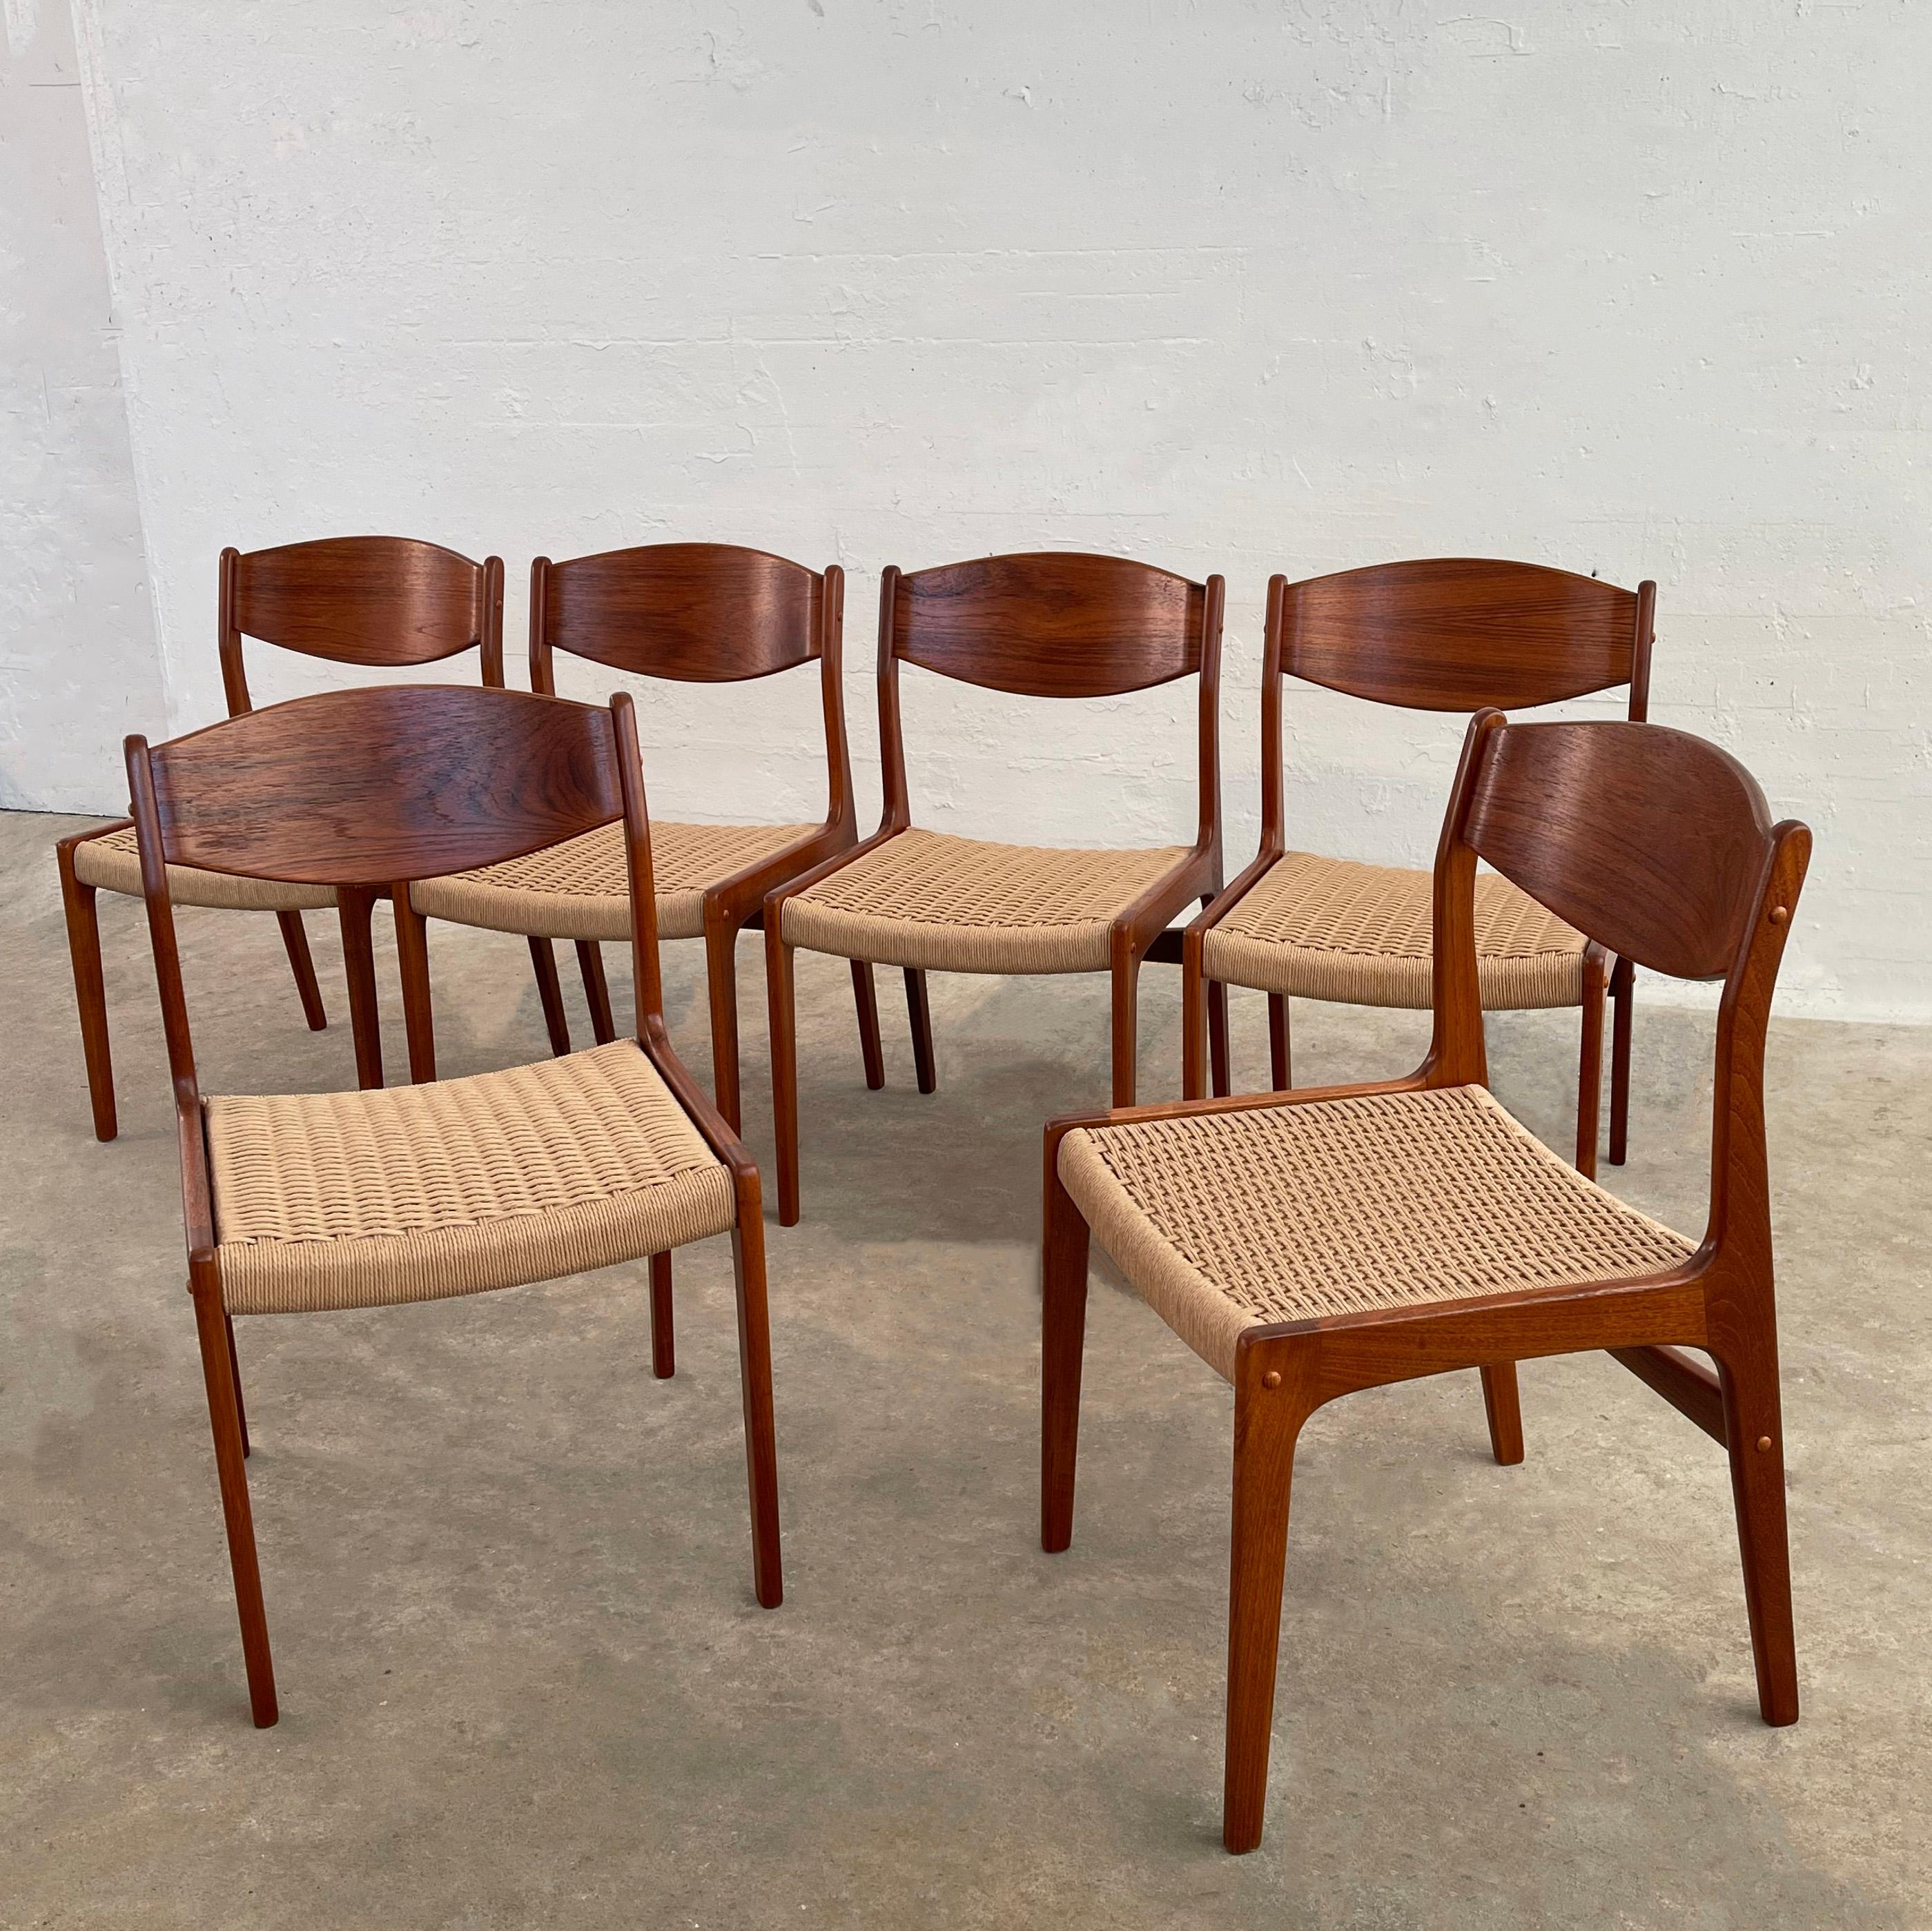 Scandinavian Modern Teak And Rope Weave Dining Chairs  In Good Condition For Sale In Brooklyn, NY